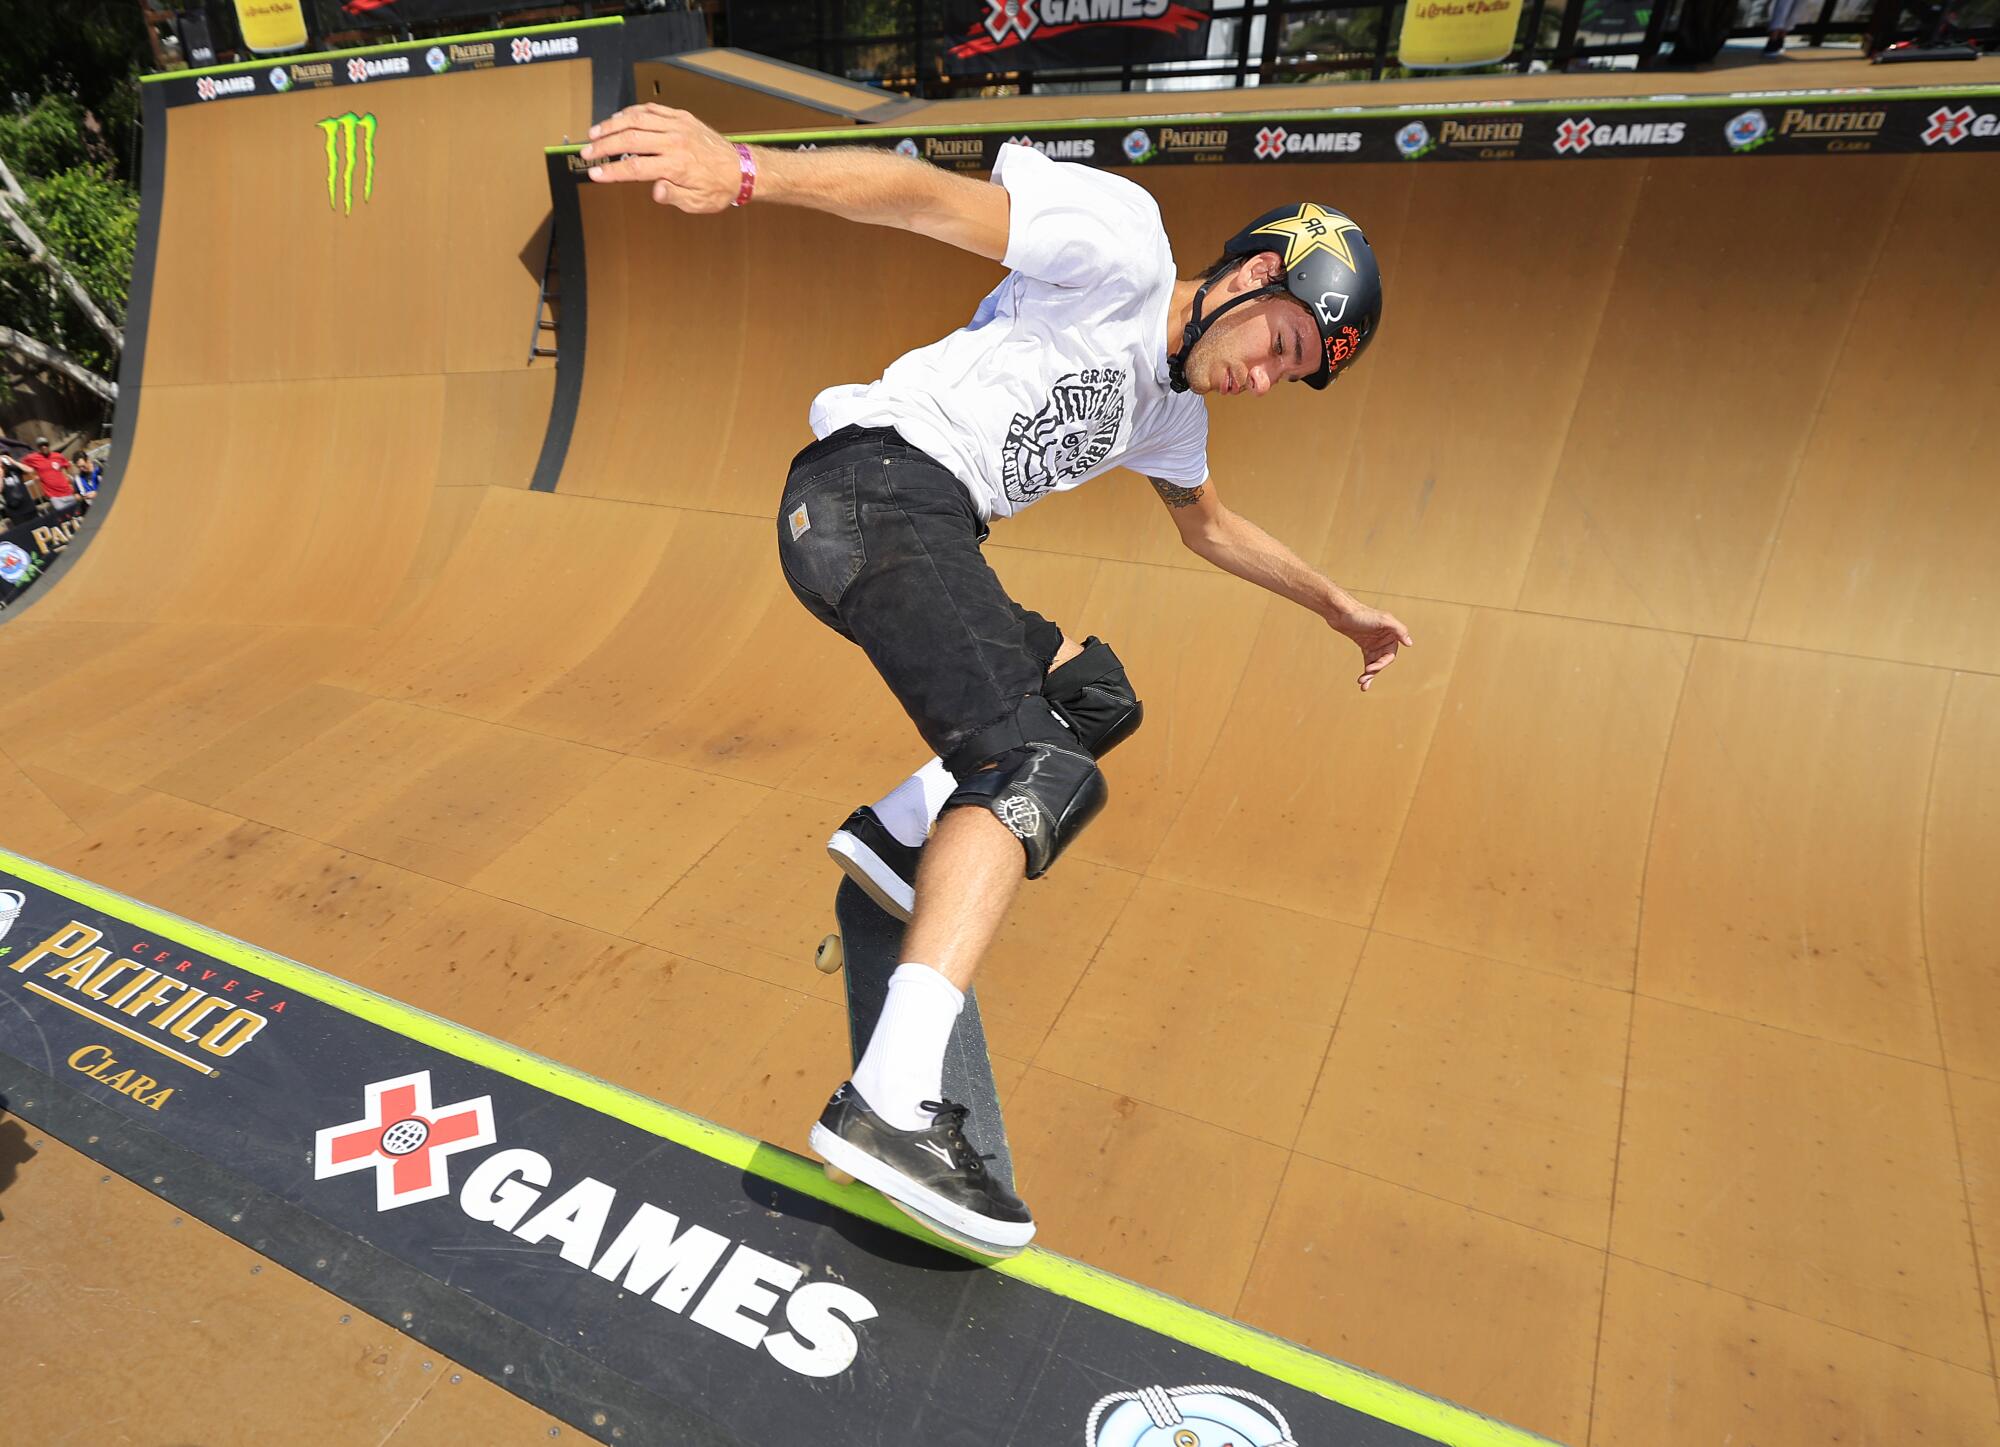 Jimmy Wilkins of Cardiff won the gold medal in the X Games skateboard vert competition.